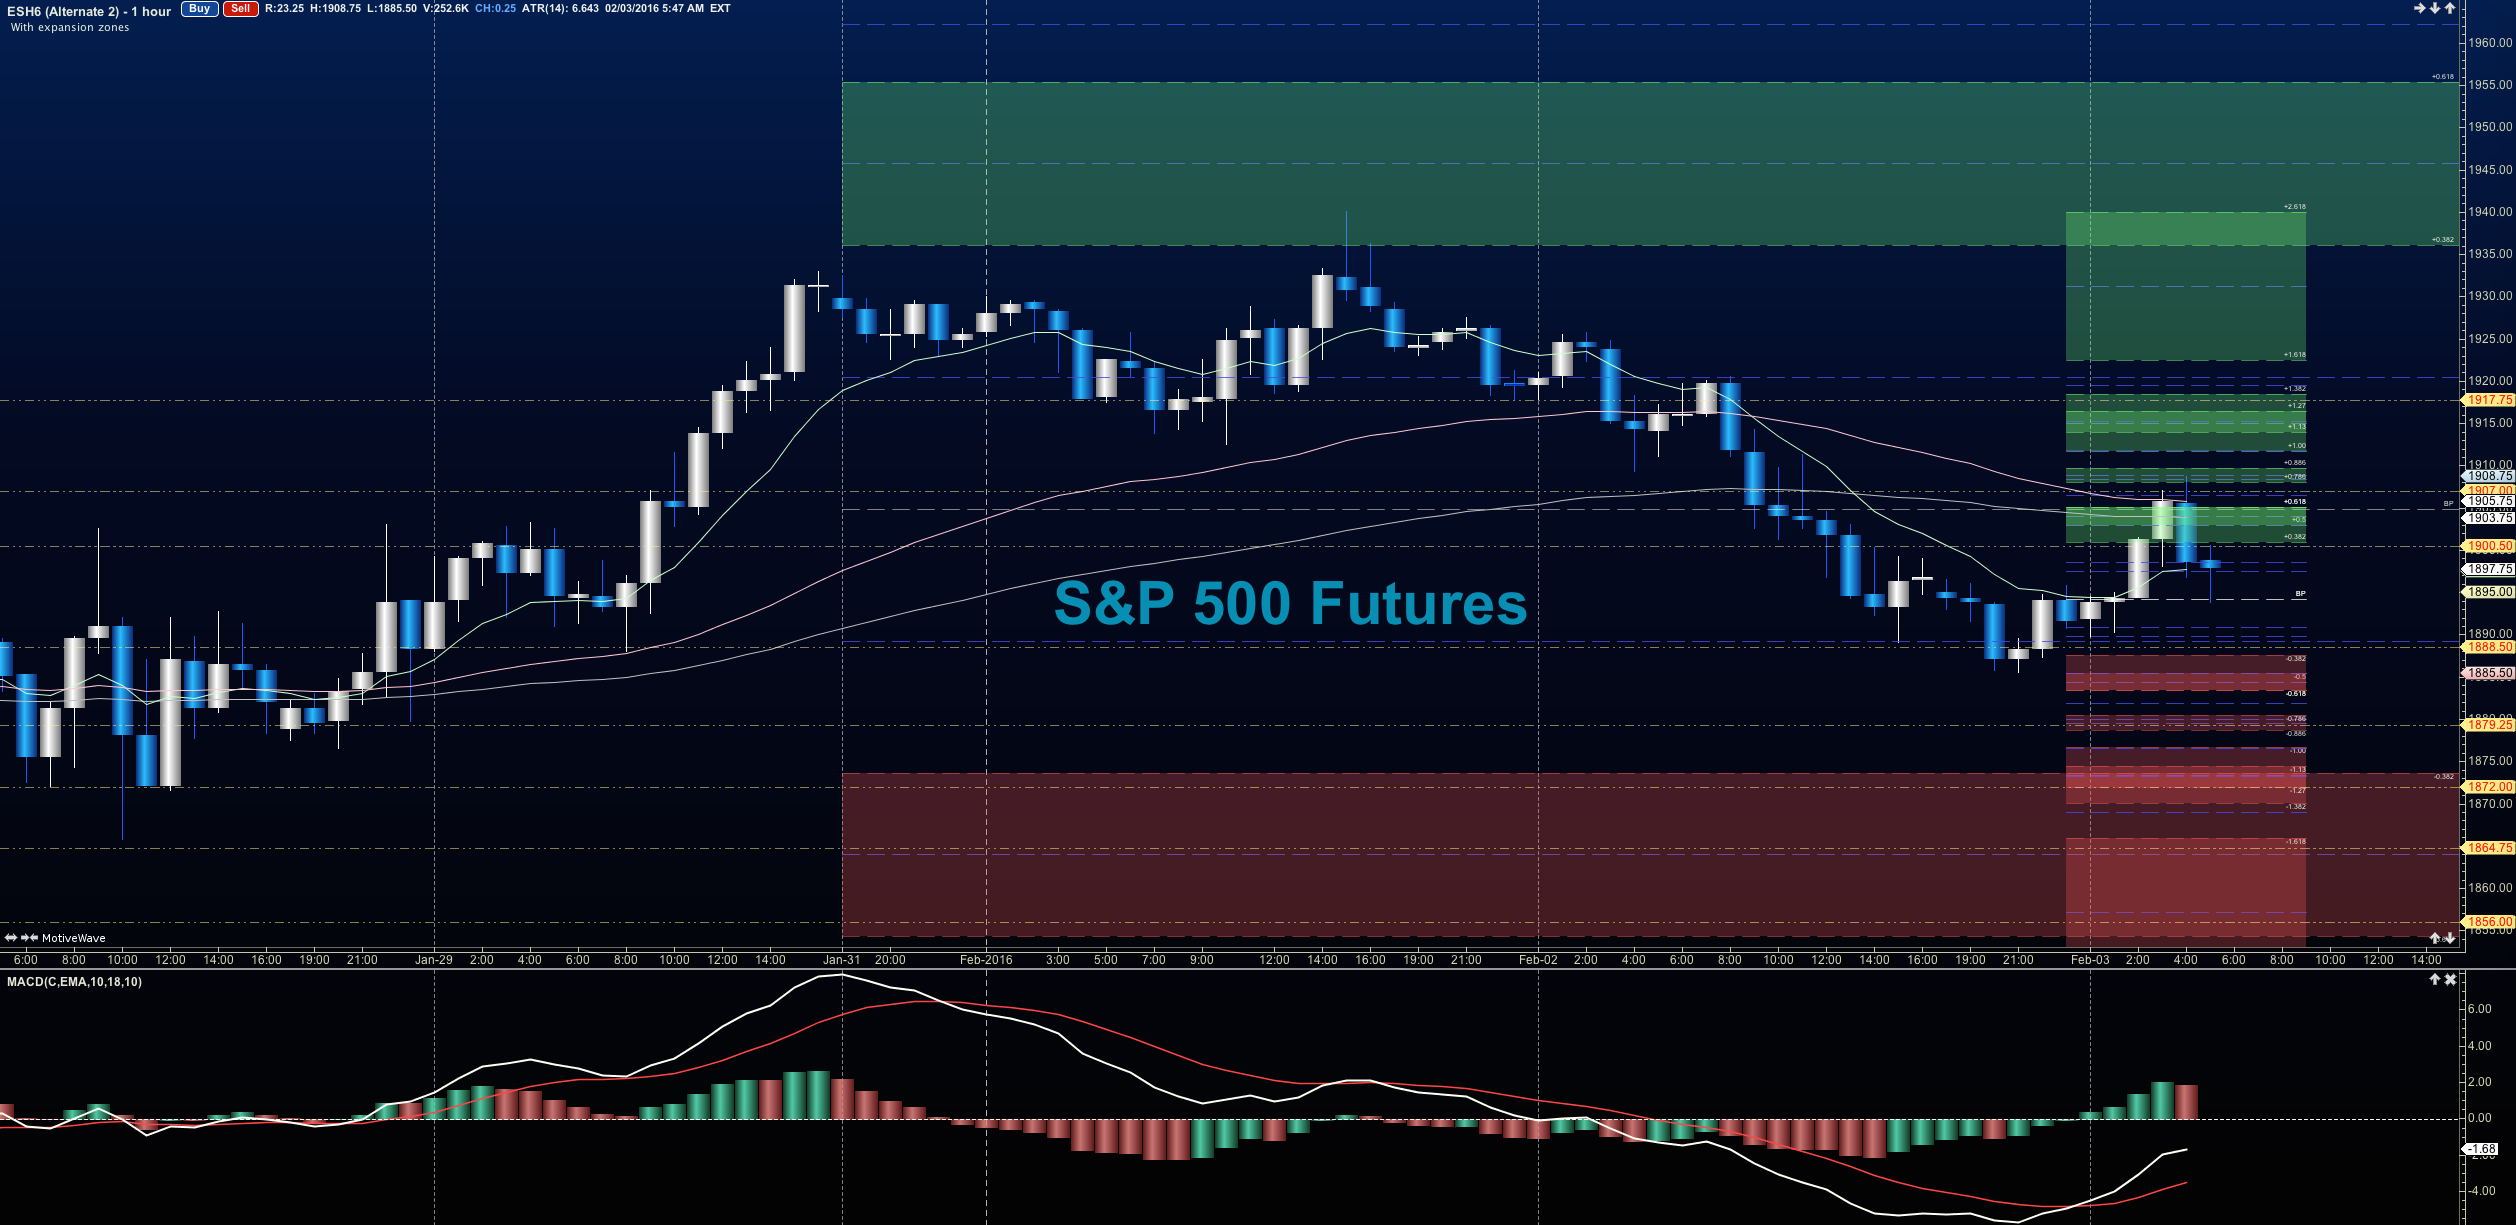 Crude Oil Futures Rally After Rout S&P 500 Futures Struggle  See It